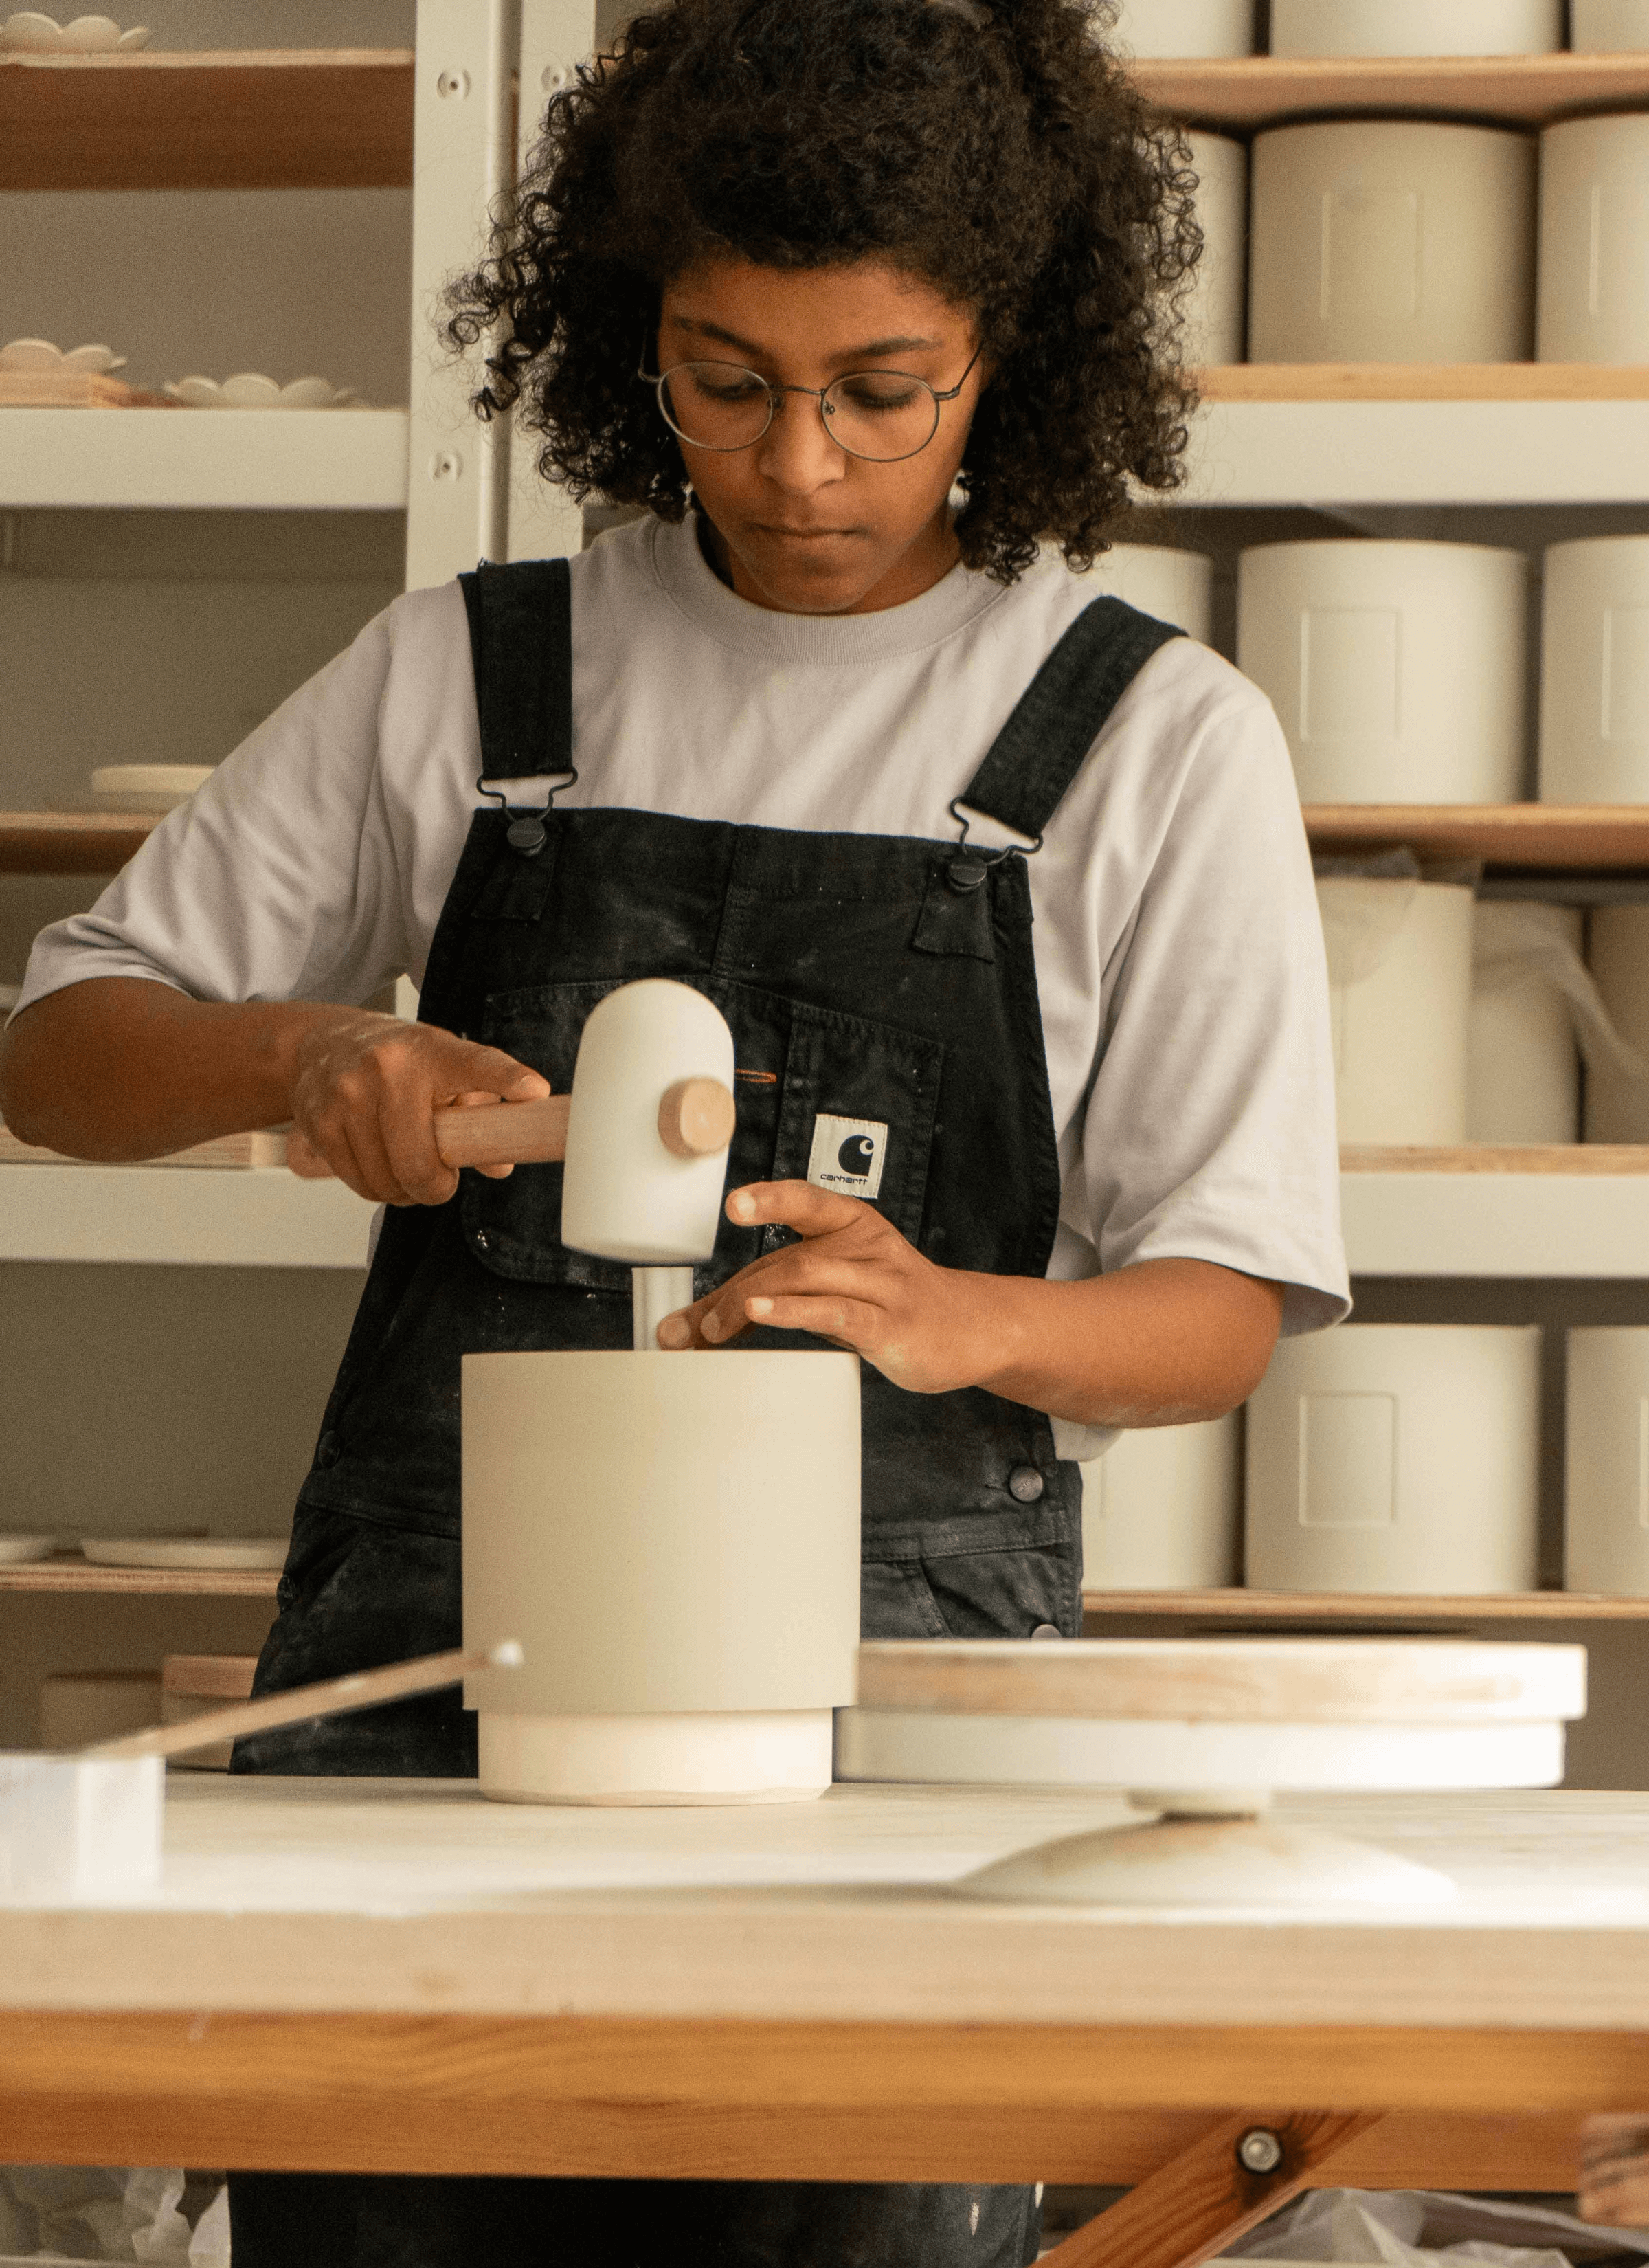 Salima used a hammer to label a symbol at the bottom of the ceramic pot that she's making on the table. She's wearing a cream t-shirt with a black dungarees and in the background, there are a full shelf of ceramic pots and flower shape of germination discs.